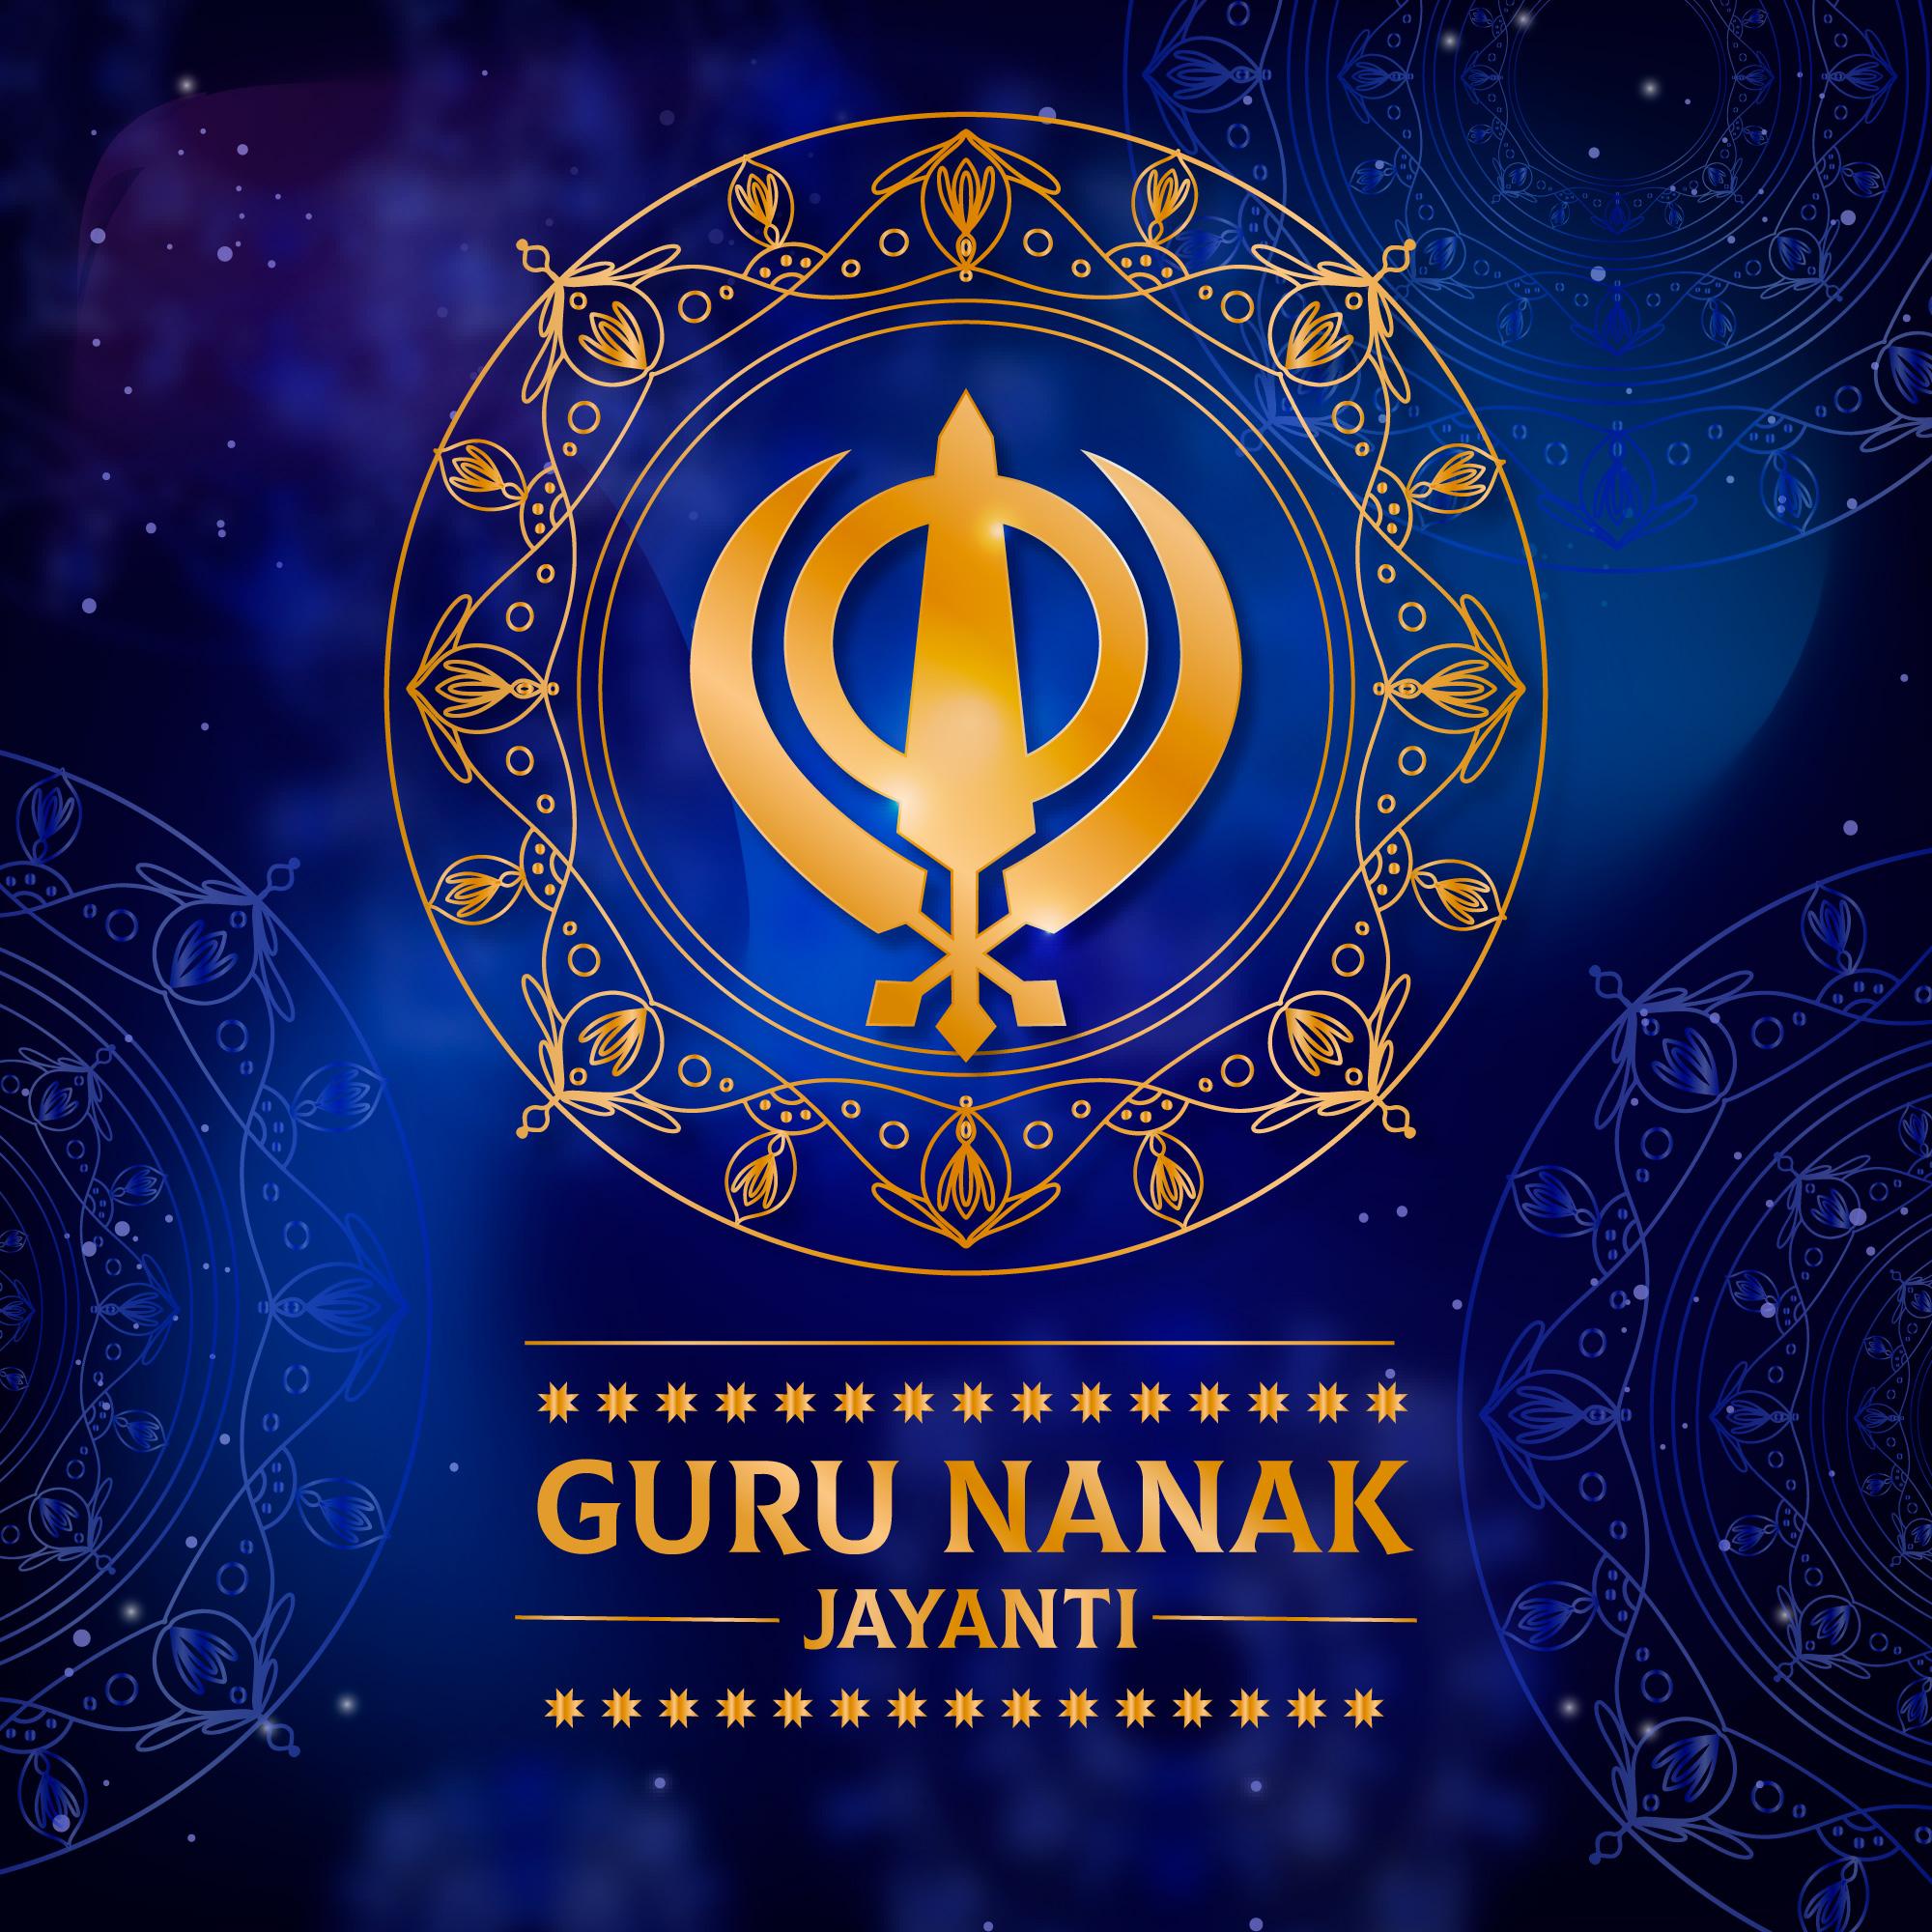 Guru Nanak Jayanti 2022: Best Wishes, Sayings, Quotes, Images, Messages, Greetings, Posters, Banners, Gifs, and Shayari